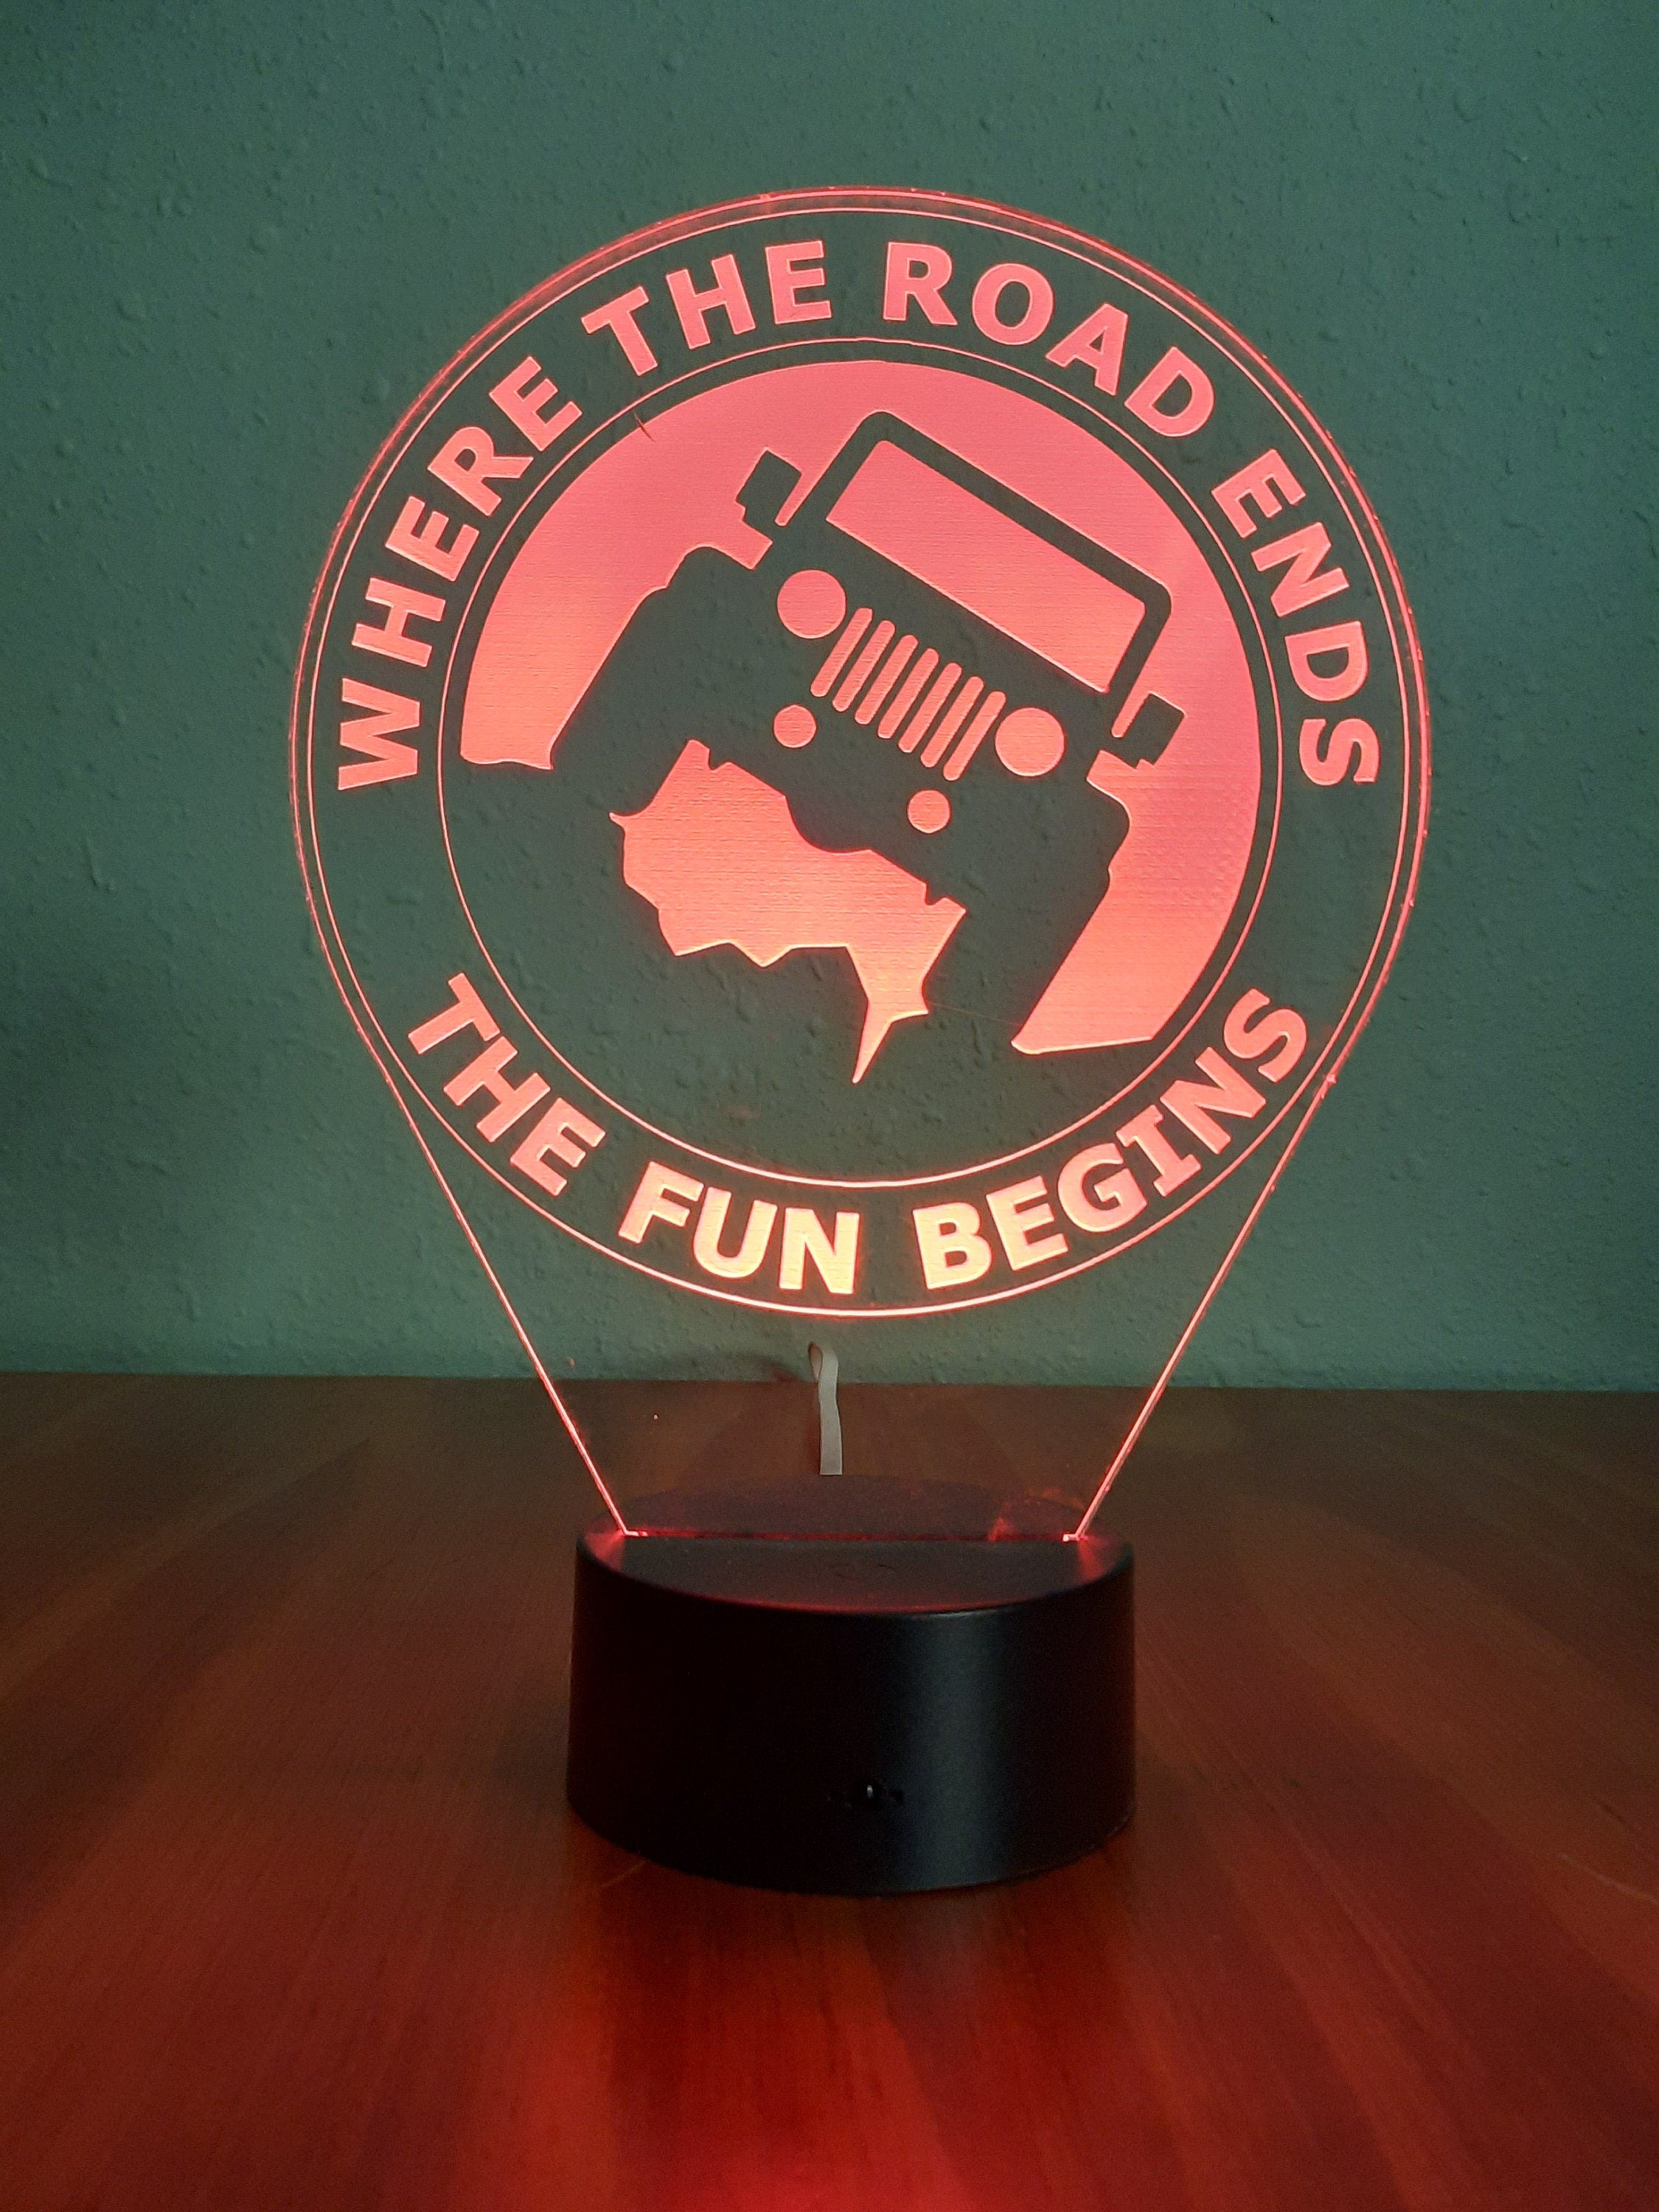 Awesome "Where the Road Ends The Fun Begins" LED lamp (1270) - FREE SHIPPING!